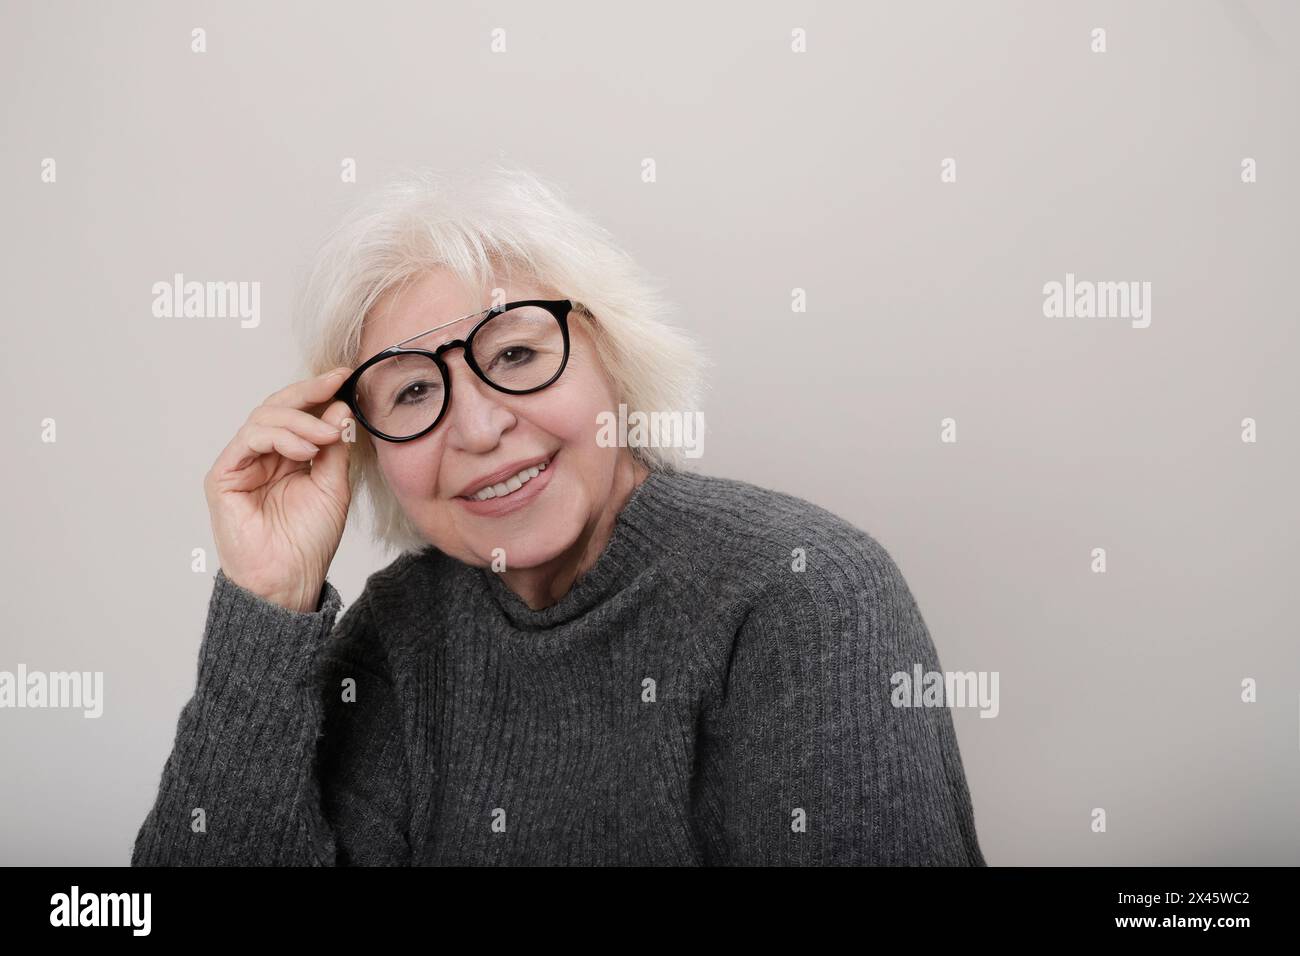 older gray-haired woman smiling at the camera wearing glasses Stock Photo